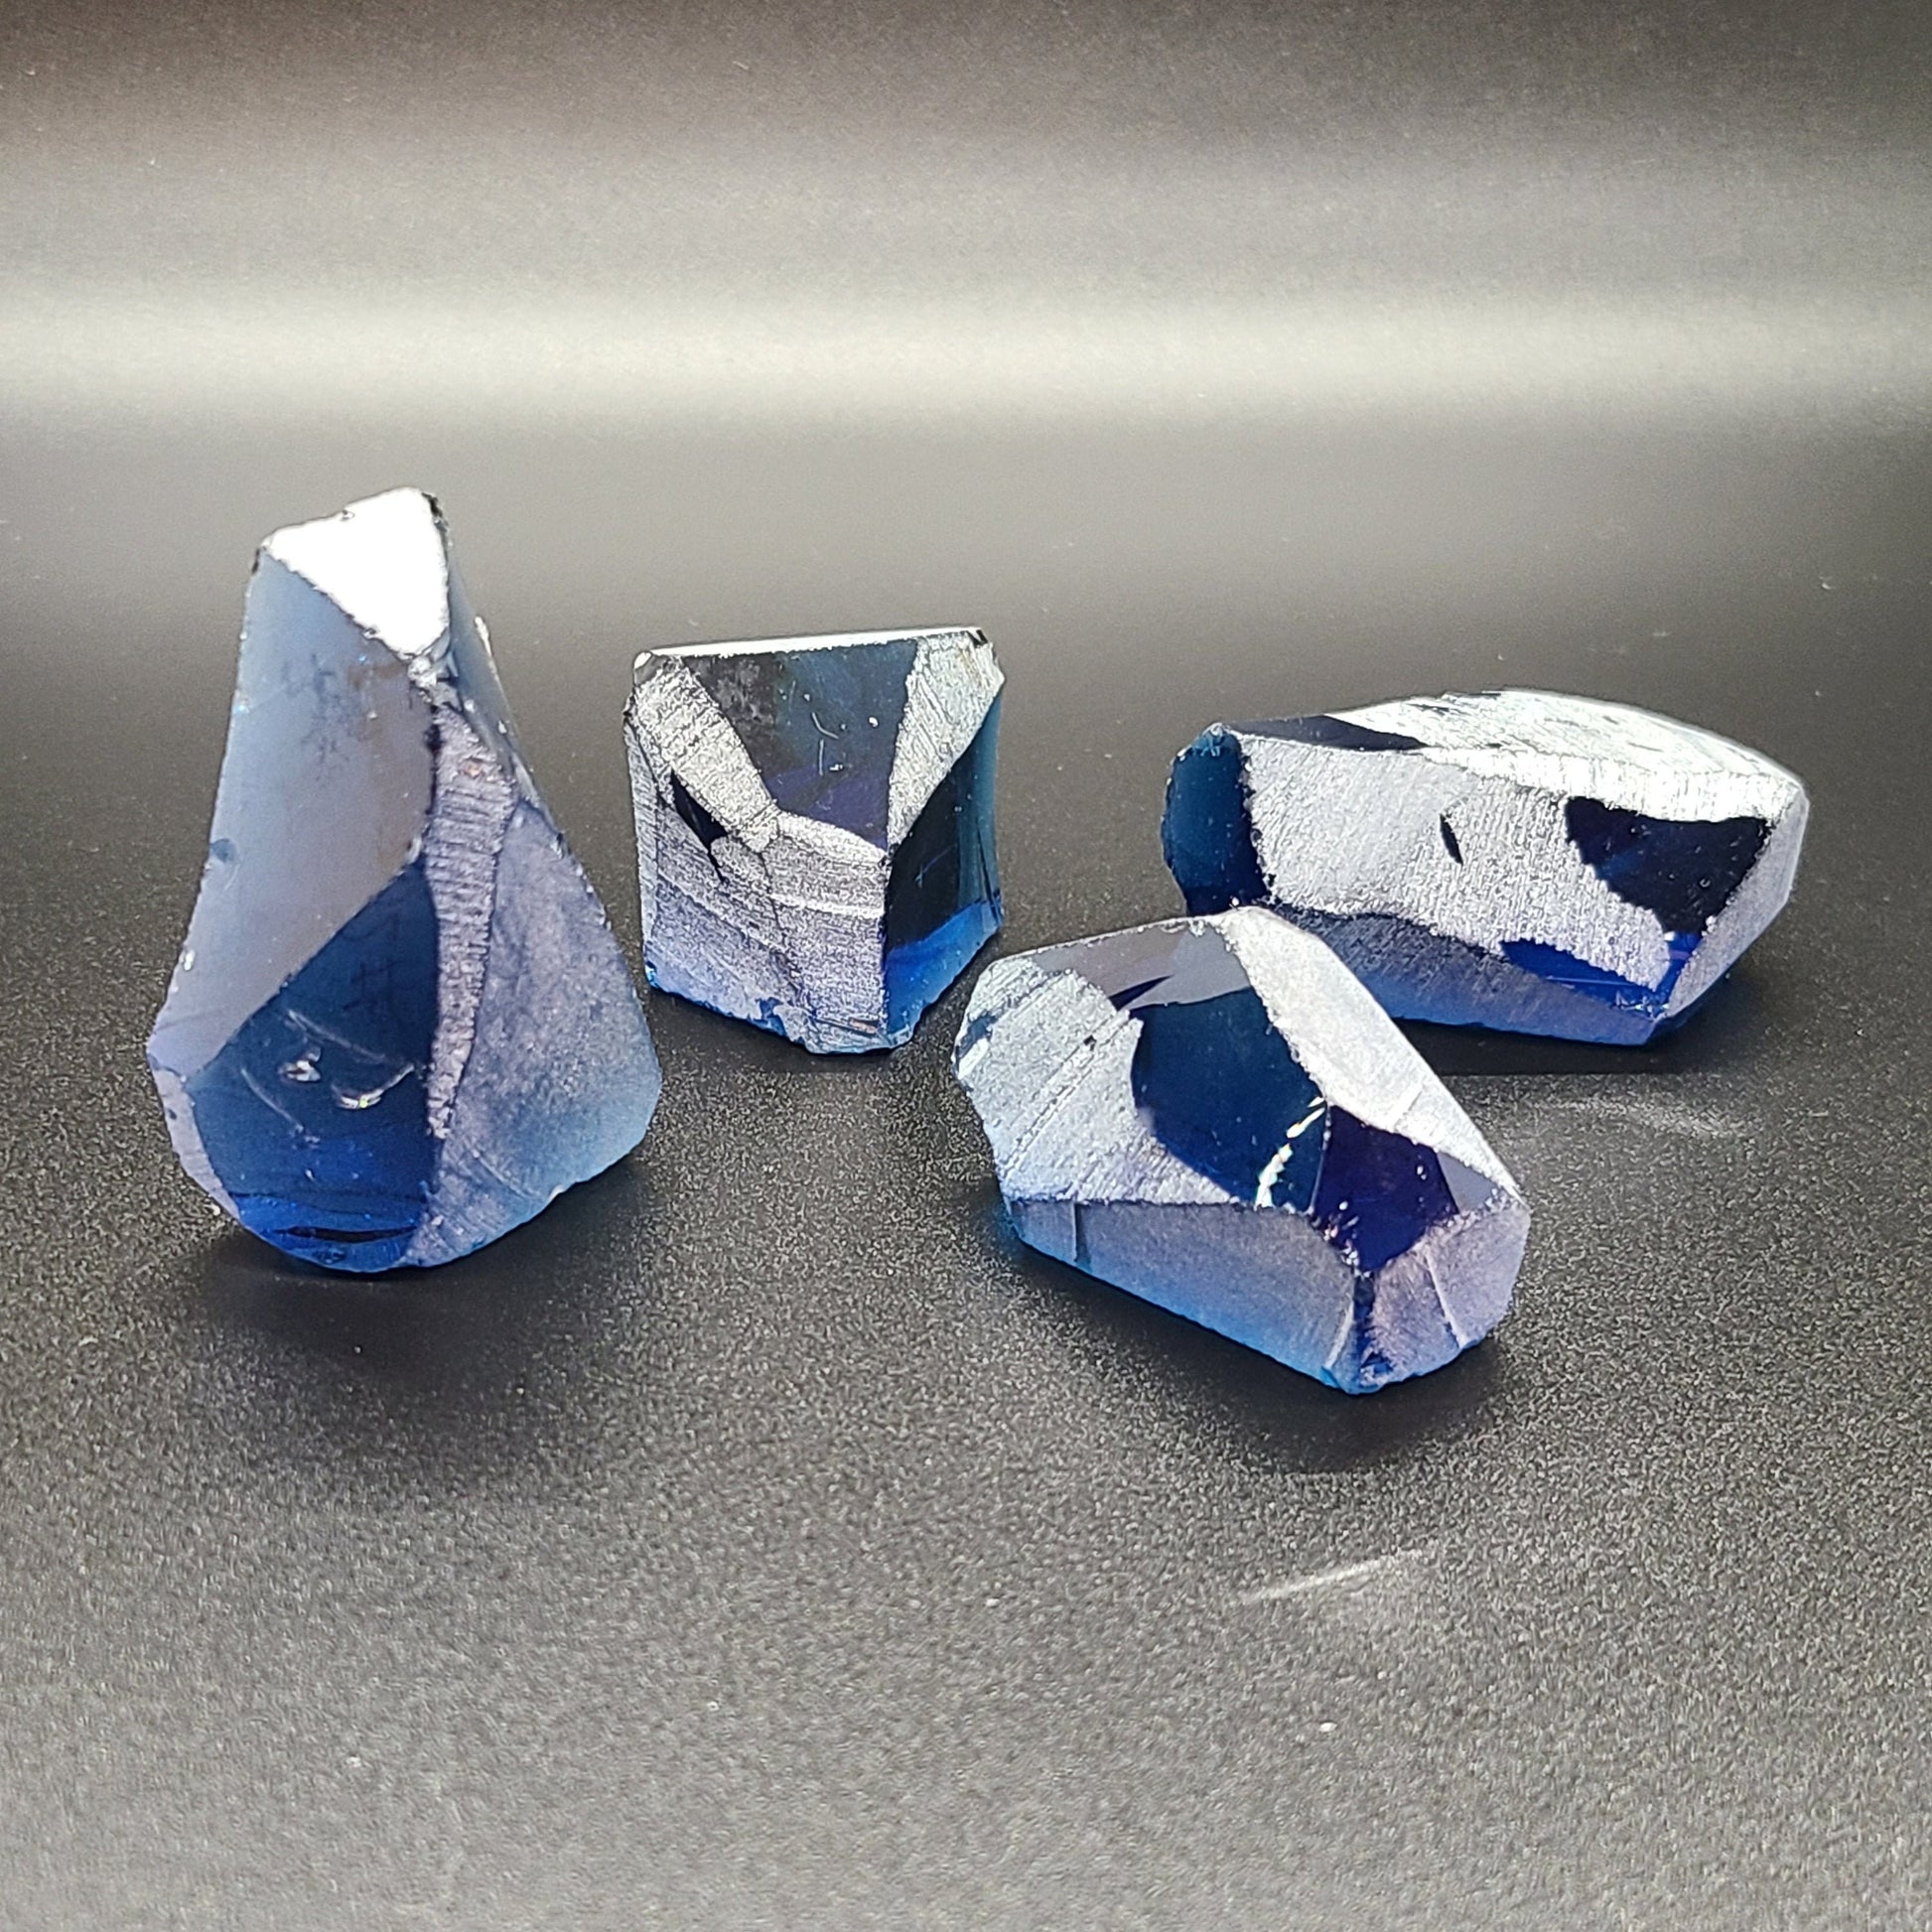 Swiss Blue Topaz Nanosital Synthetic Lab Created Faceting Rough for Gem Cutting - #1782 - Various Sizes